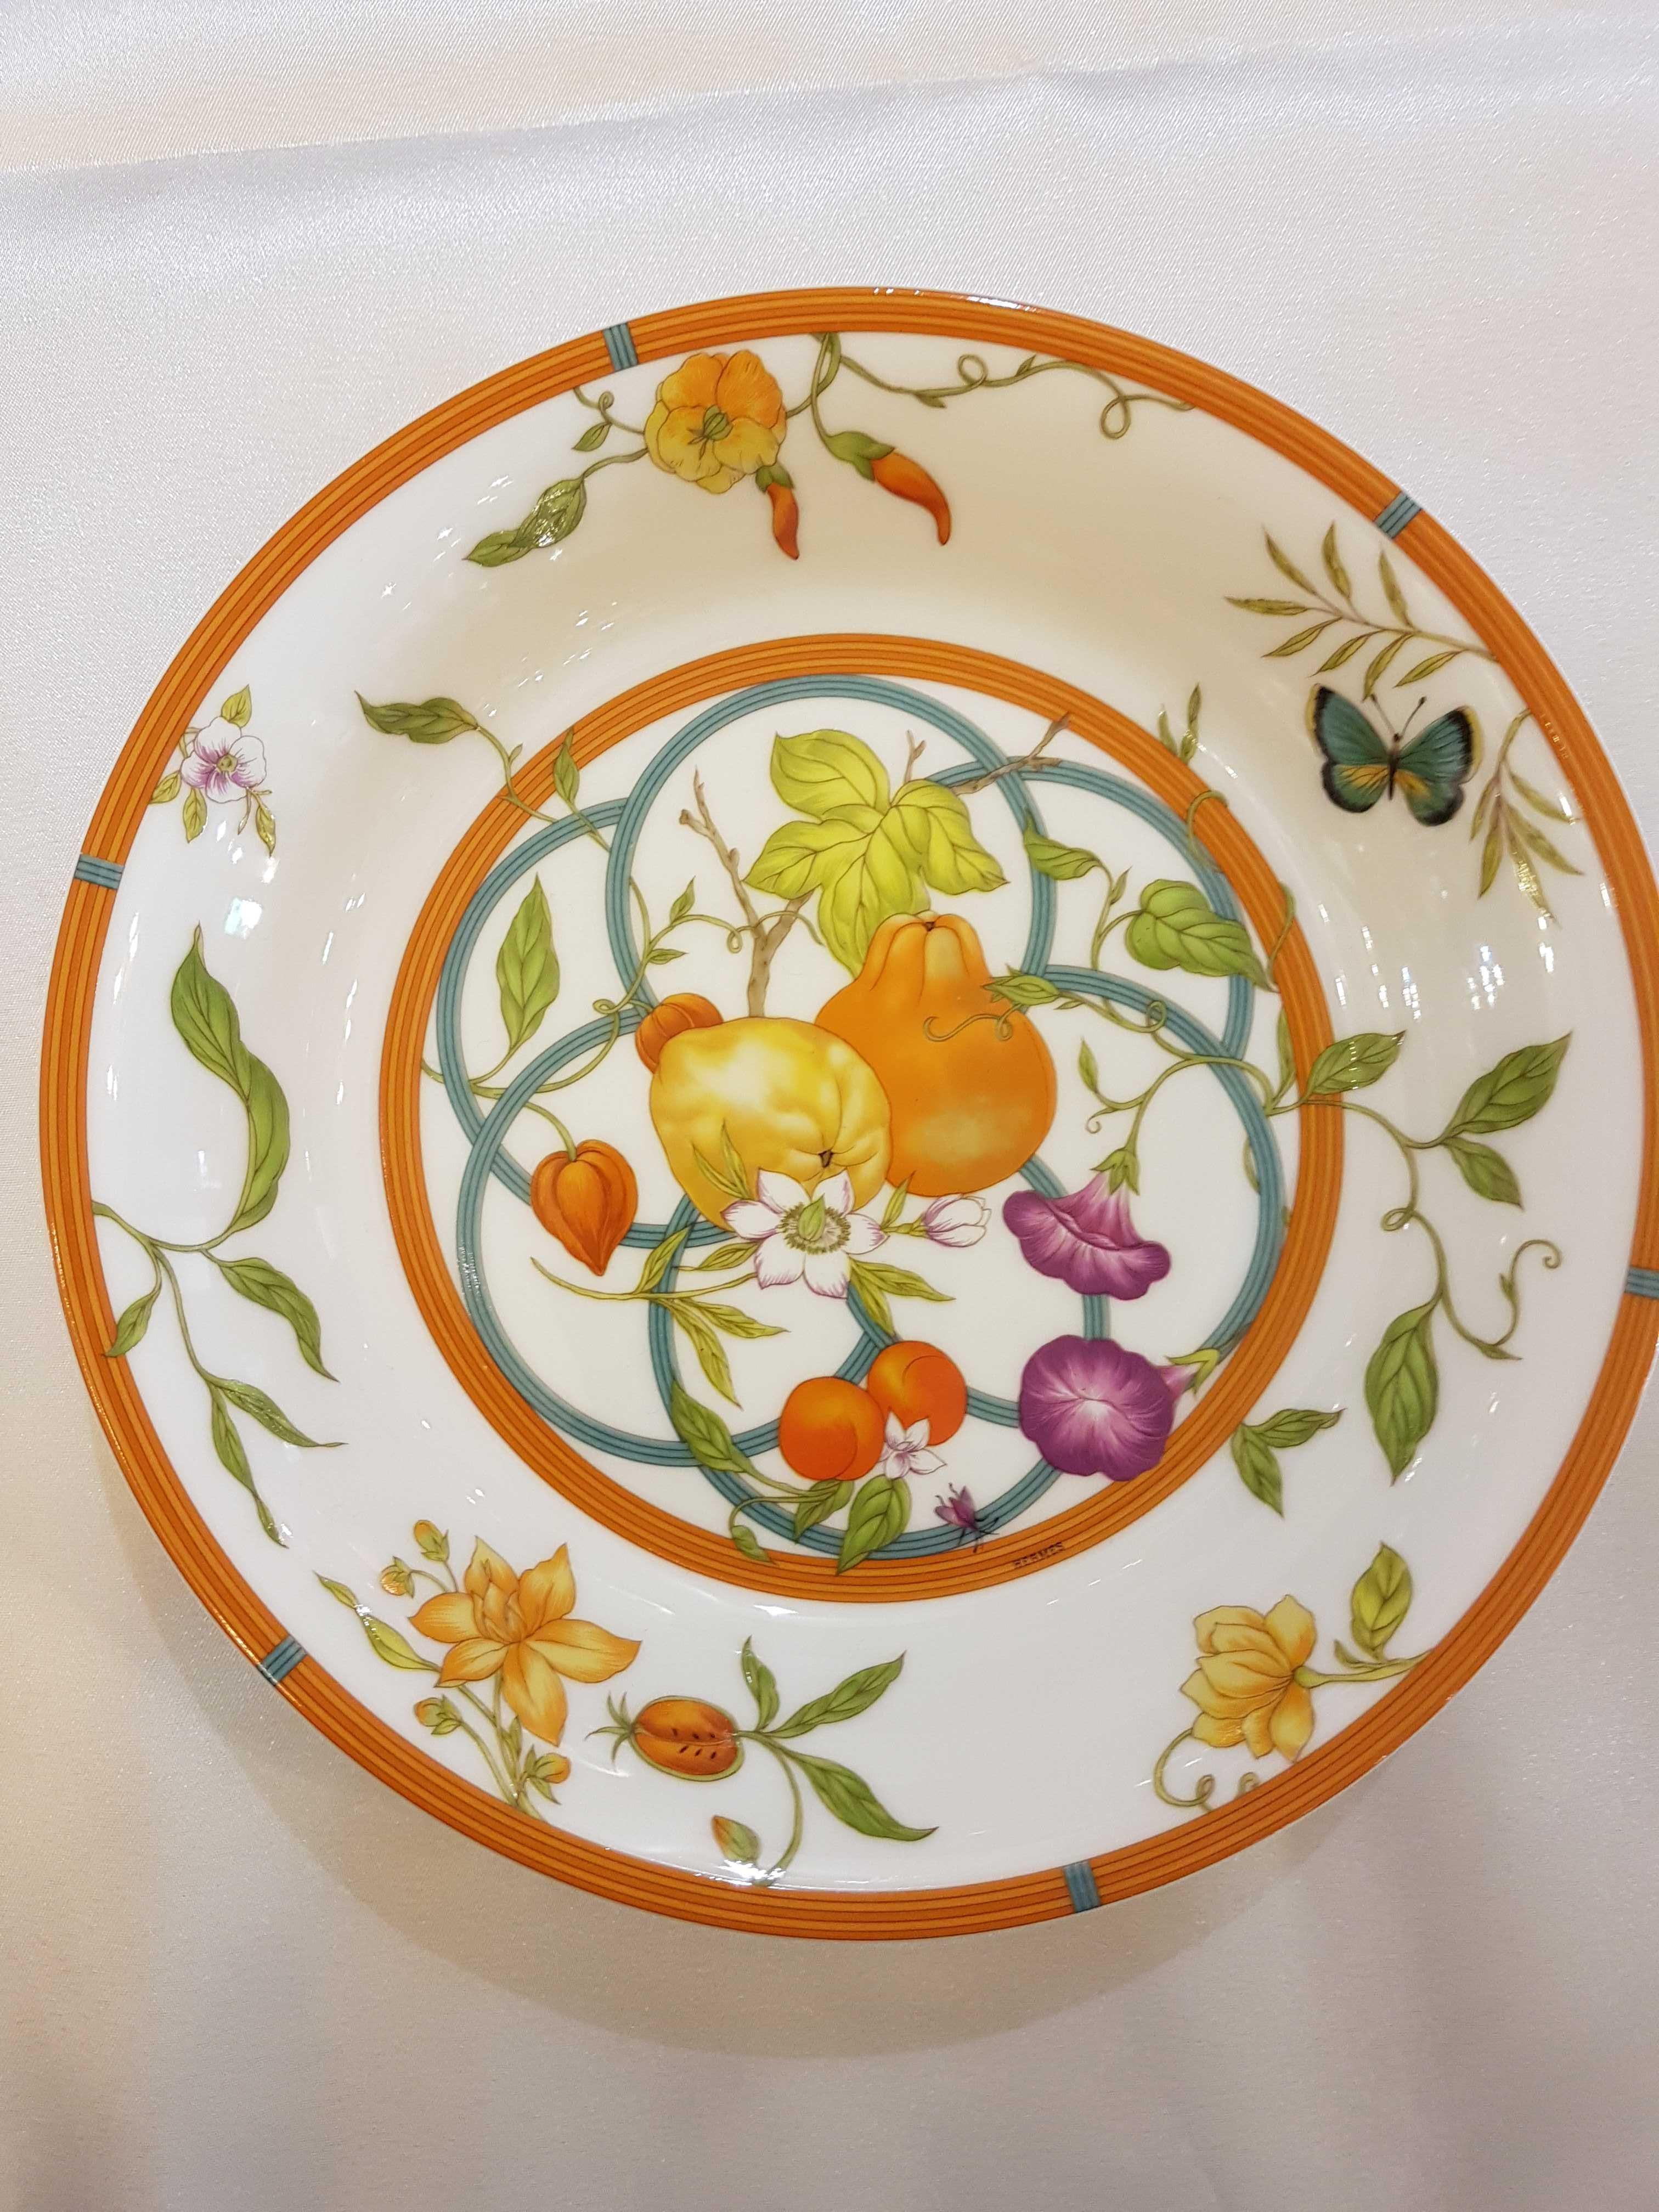 An Hermès polycrome porcelain set of two cereals bowls.
Siesta Island pattern decorated with motif of flowers, fruits and butterflies.
Pattern discontinued today.
In his original Hermes orange box.